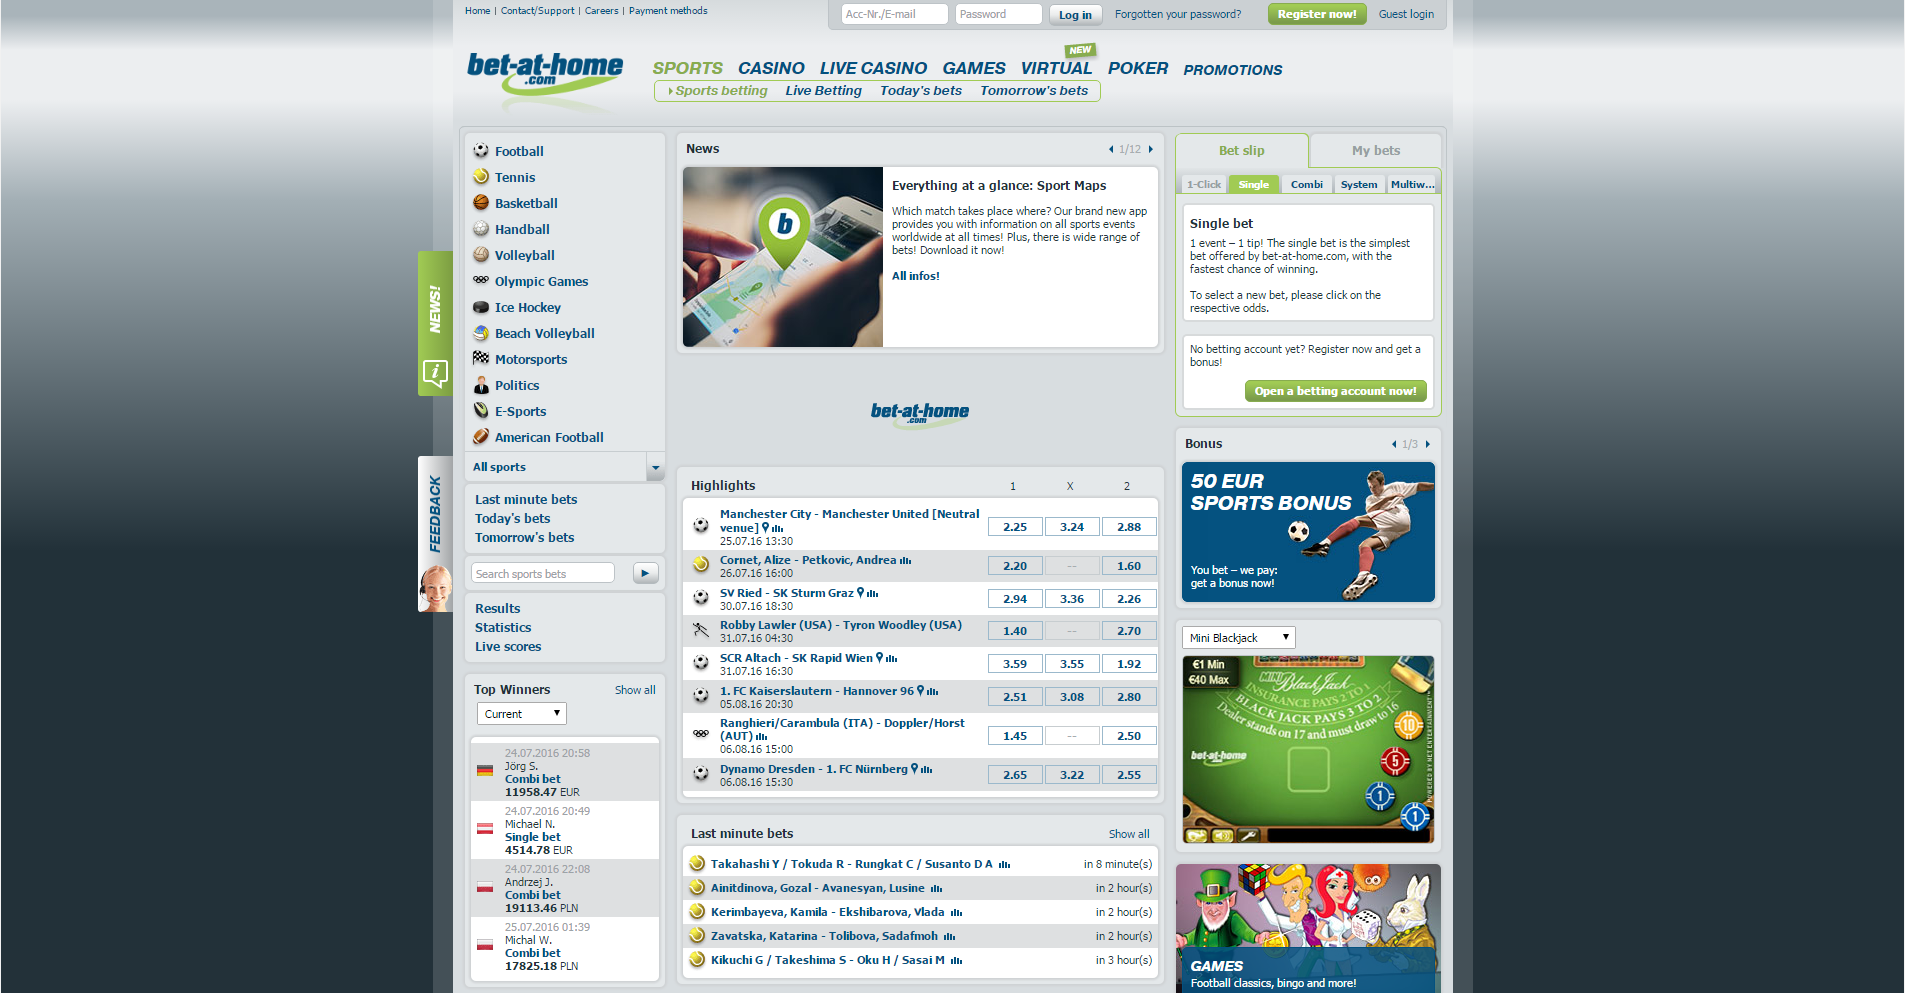 Bet-at-home's Sportsbook homepage